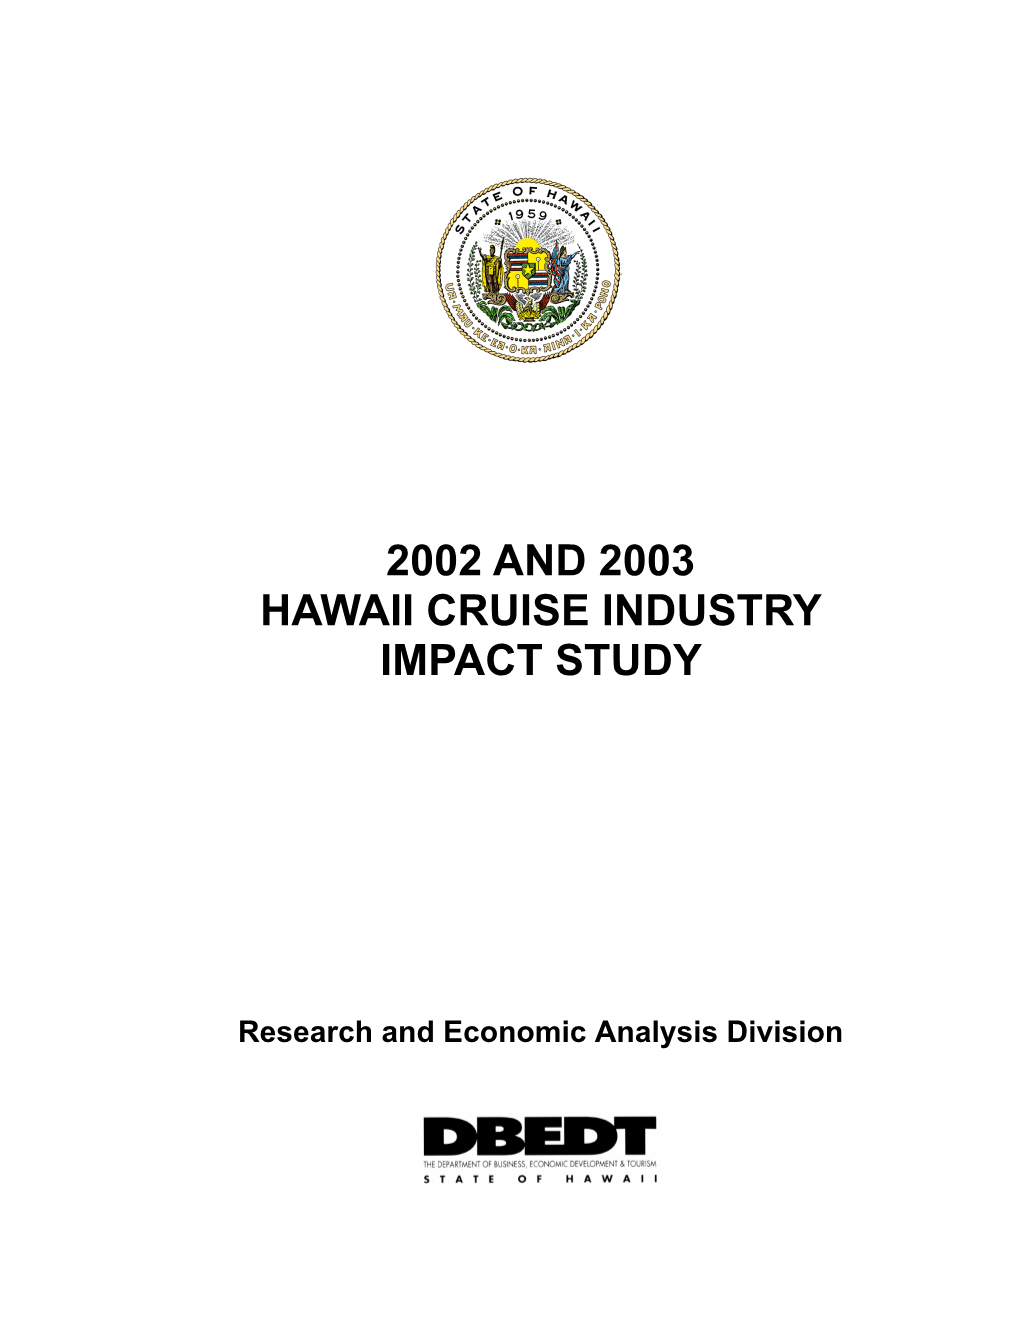 2002 and 2003 Hawaii Cruise Industry Impact Study